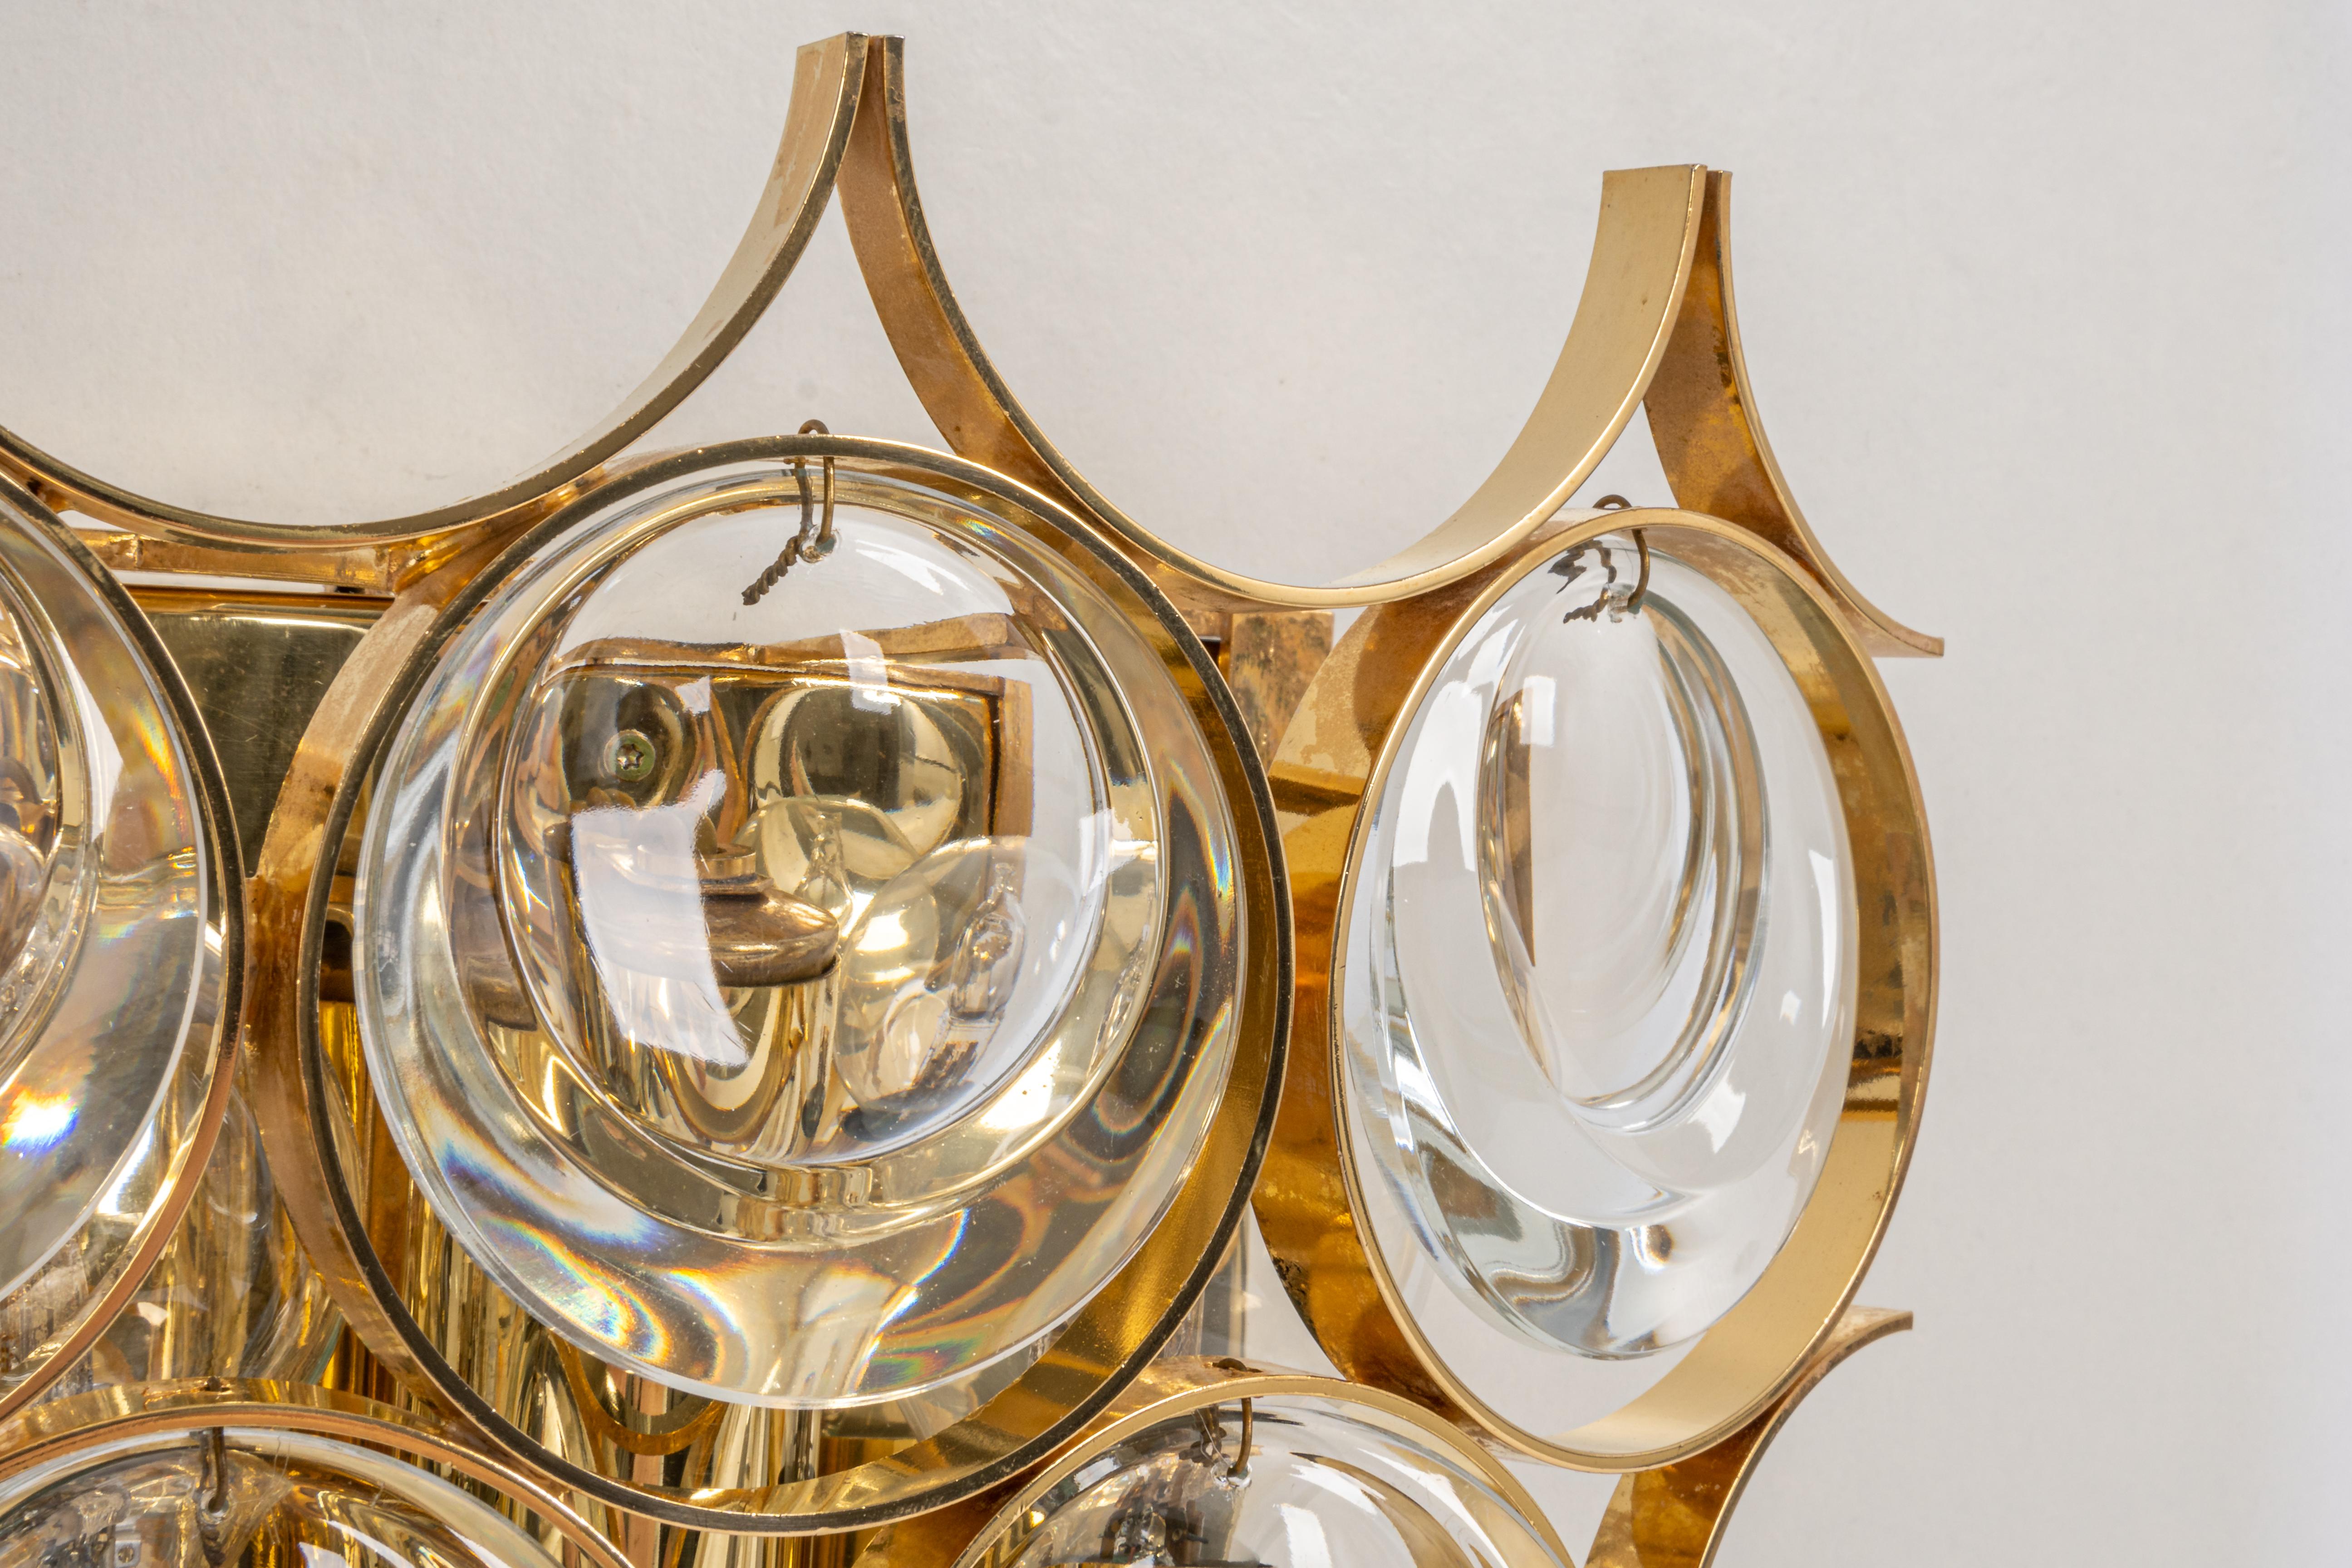 A pair of stunning golden sconces, made by Palwa, design Sciolari Style- Germany, circa 1960-1969.
Crystal glasses on a gilt brass frame.
Best of the 1960s from Germany.

High quality and in very good condition. Cleaned, well-wired and ready to use.